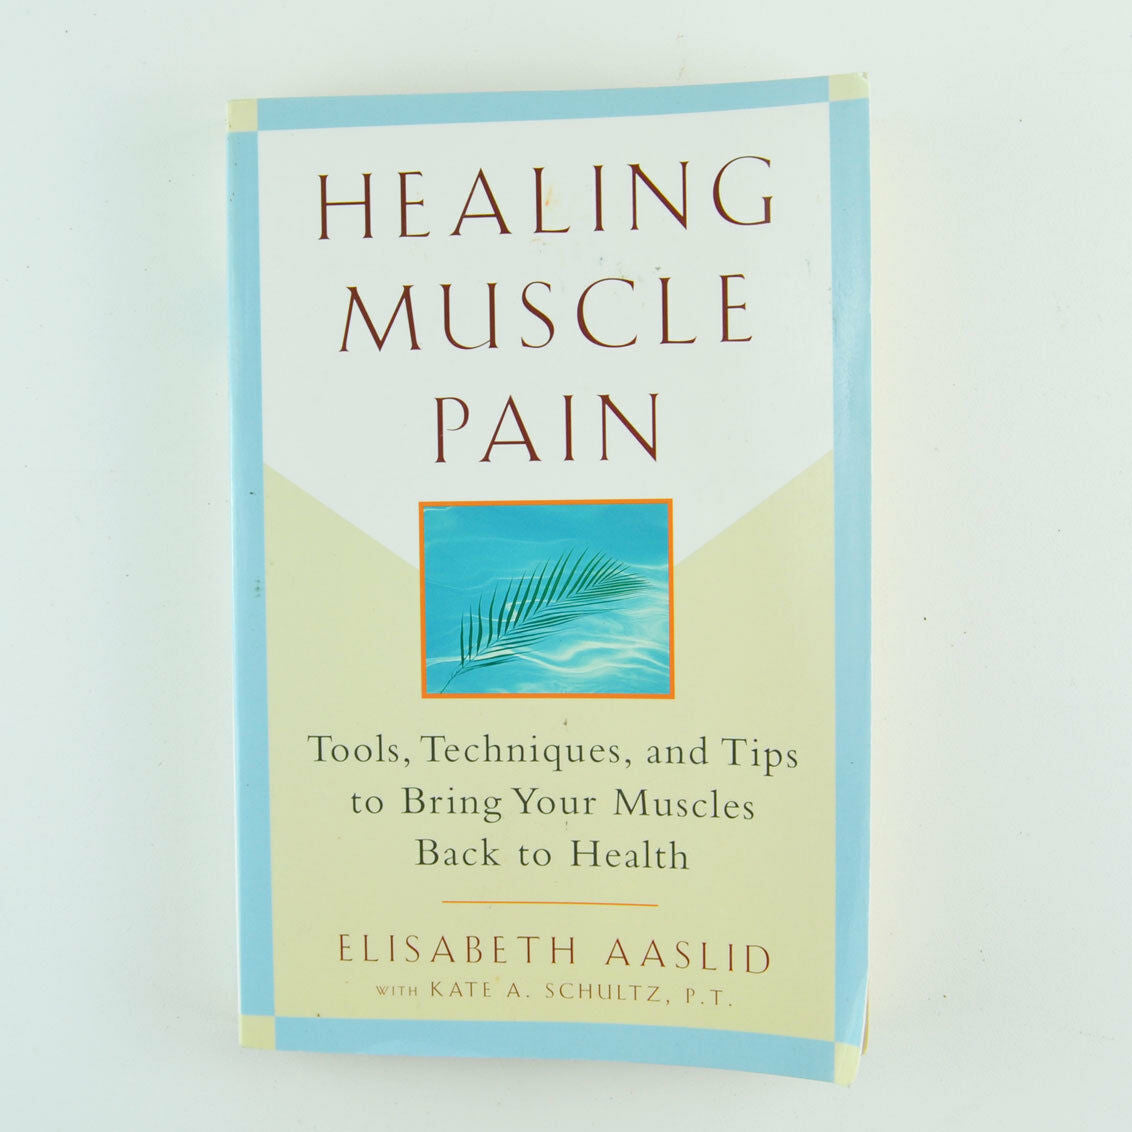 Healing Muscle Pain : Tools, Techniques, and Tips to Bring Your Muscles